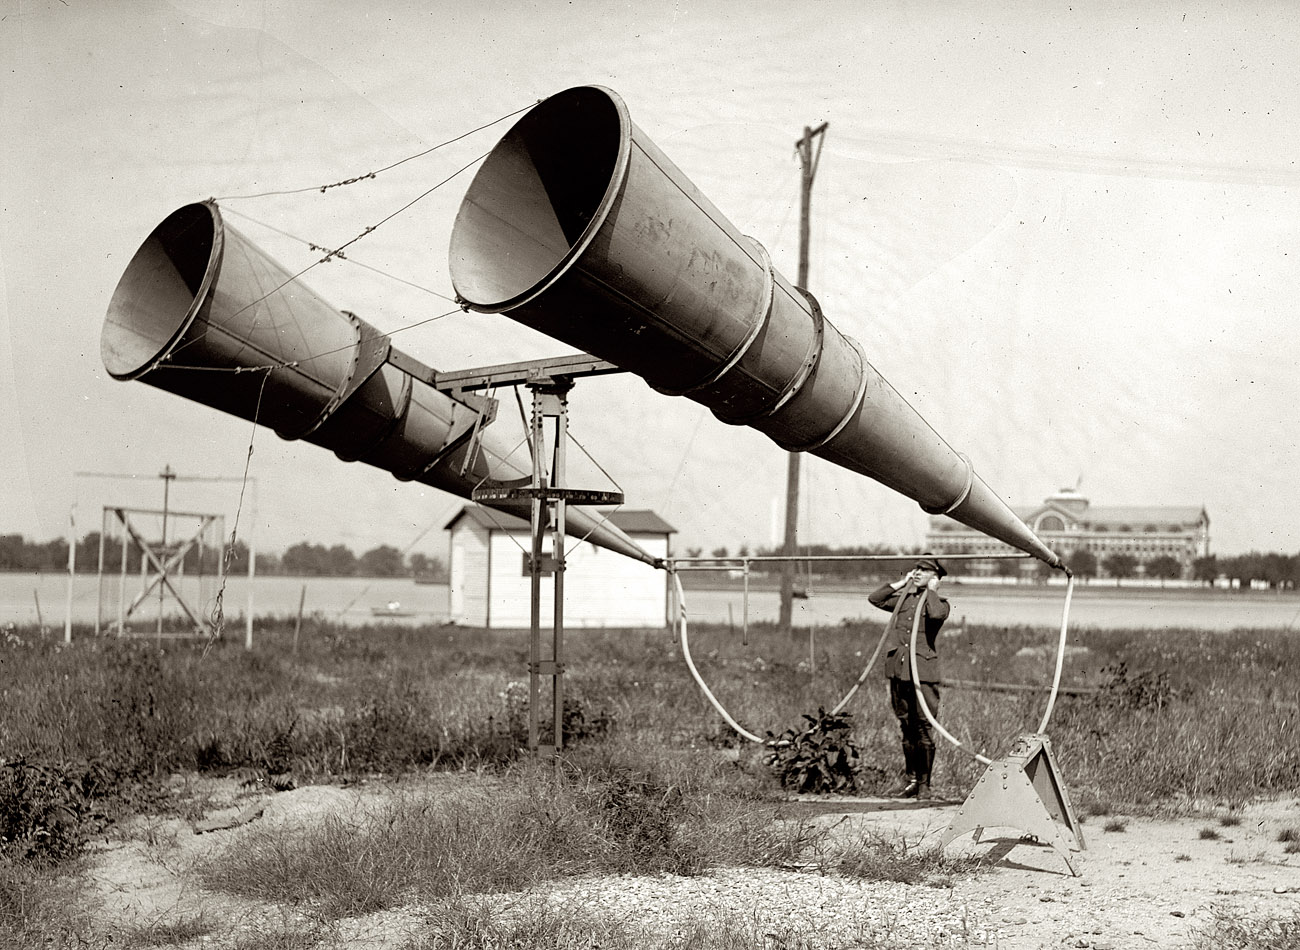 "Amplifiers at Bolling Field, 1921." Two giant horns with ear tubes, evidently designed to listen for approaching aircraft. View full size. National Photo Co.